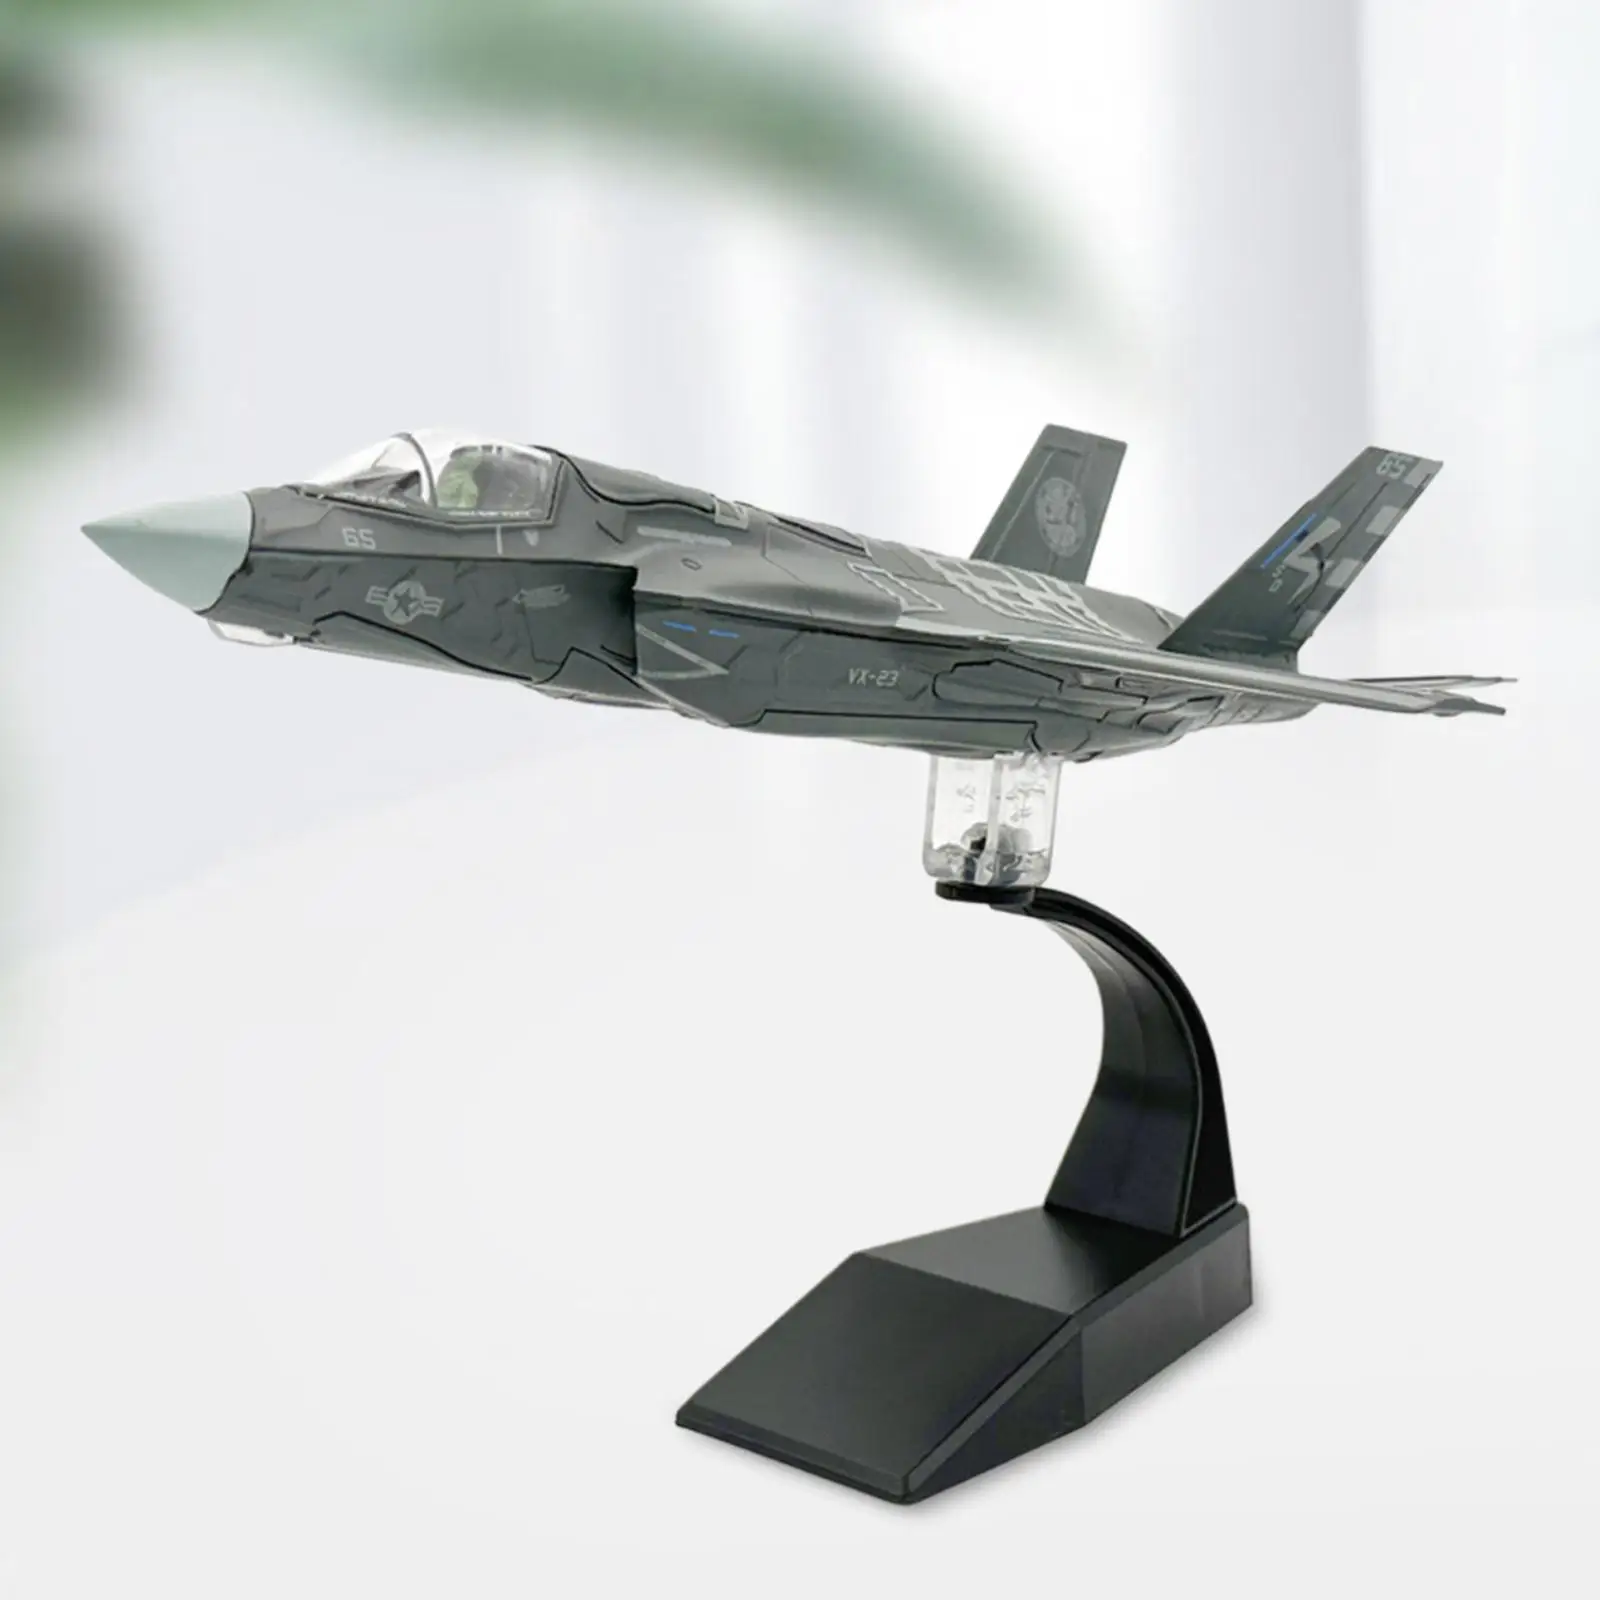 

Aircraft Model 1:72 Tabletop Decor Aviation Commemorate Plane Model Airplane Model Ornament Plane Model Toy for Adults Boy Gift